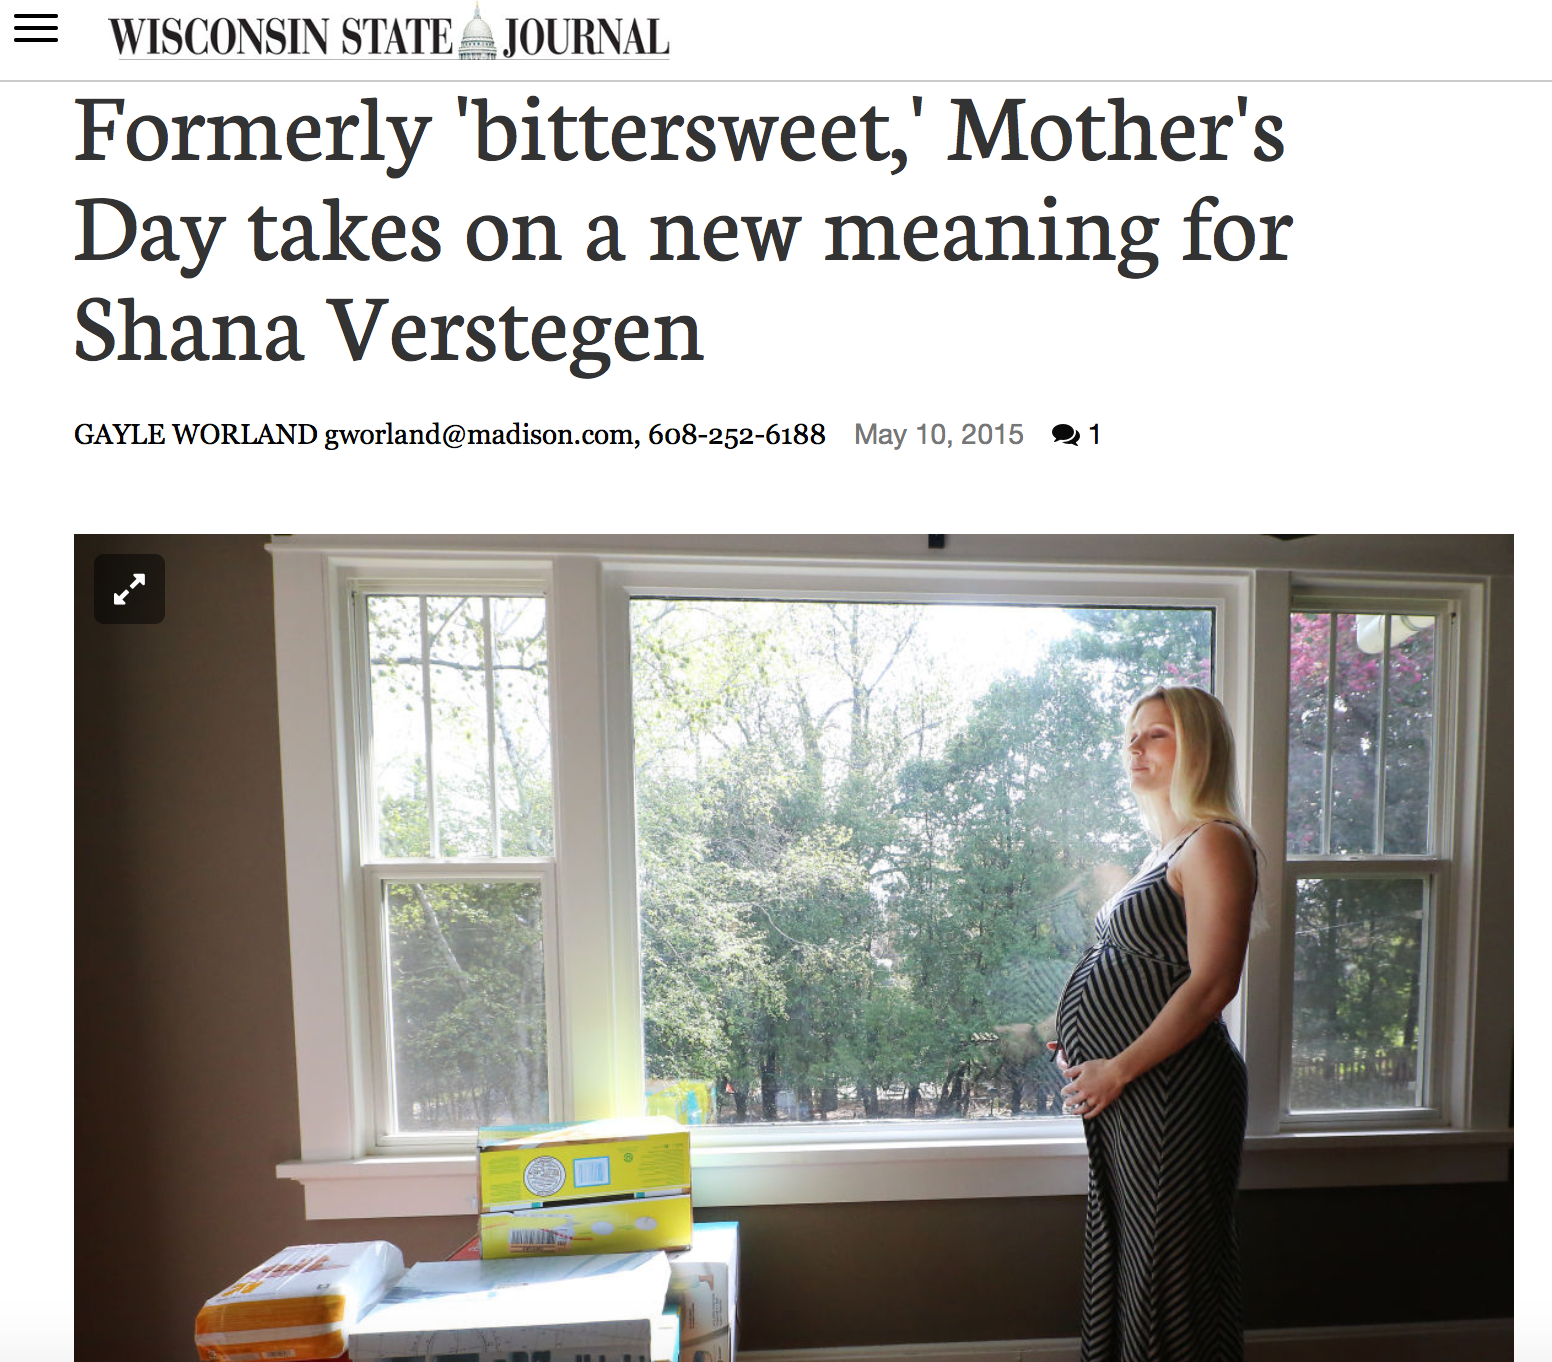 Formerly 'bittersweet,' Mother's Day takes on a new meaning for Shana Verstegen: Wisconsin State Journal 2015